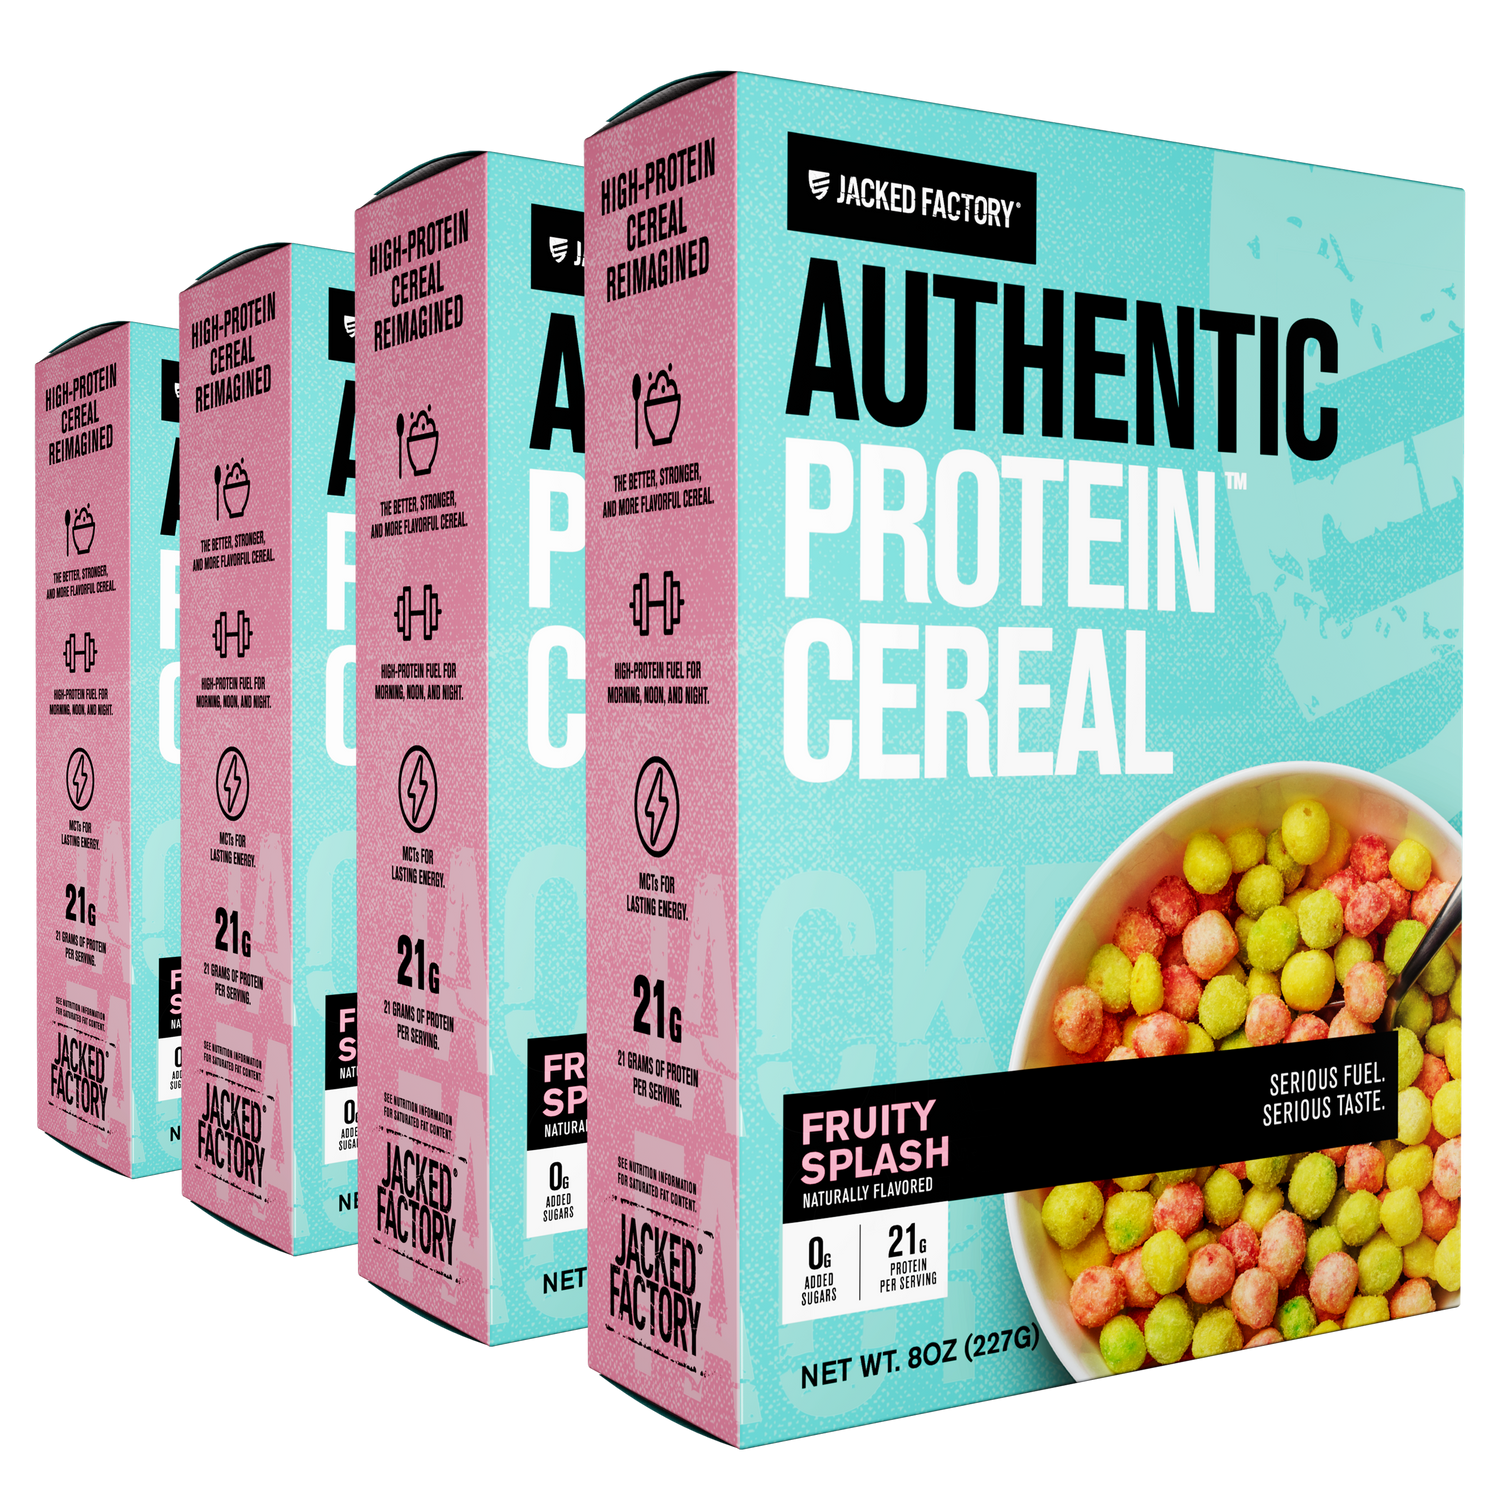 Four Boxes of Jacked Factory Authentic Protein Cereal Fruity Splash. Blue cereal boxes with pink accents black and white text